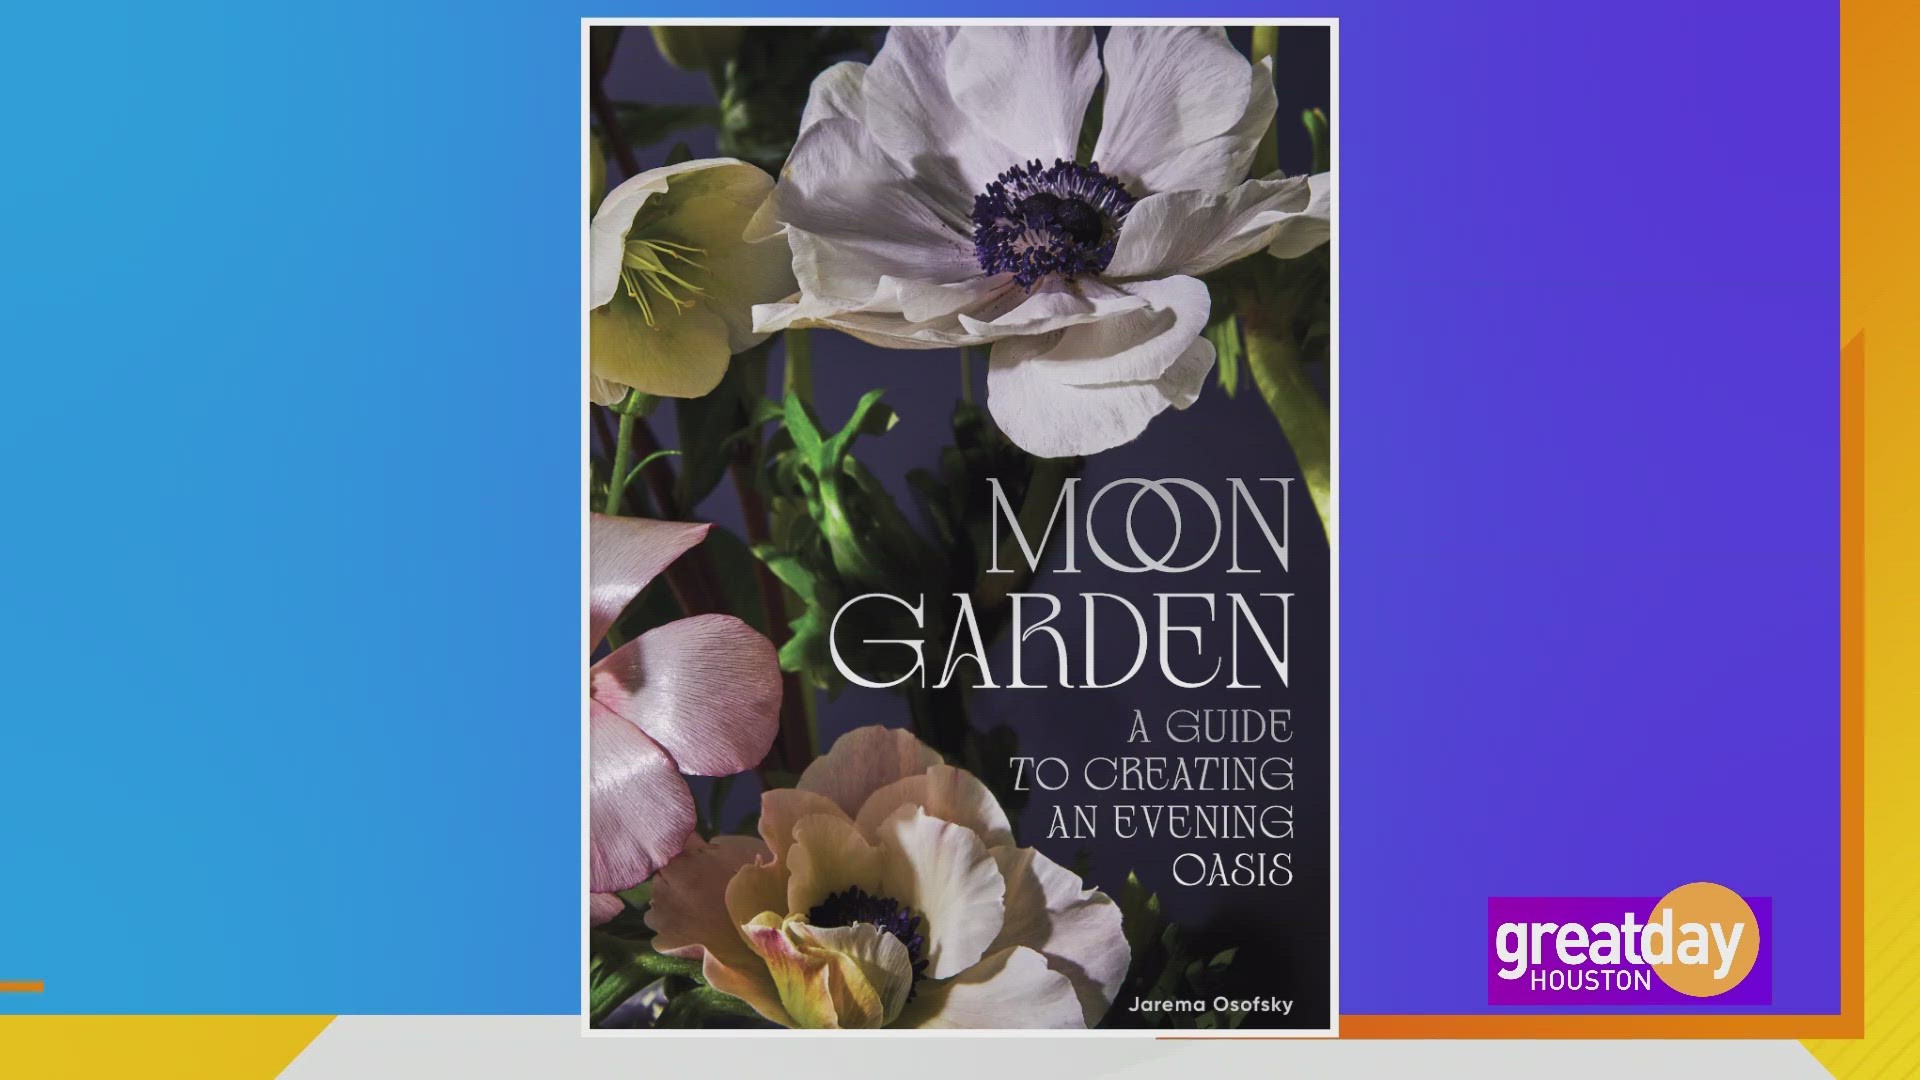 Author, Jarema Osofsky, explains what a Moon Garden is all about and how you can create your own.